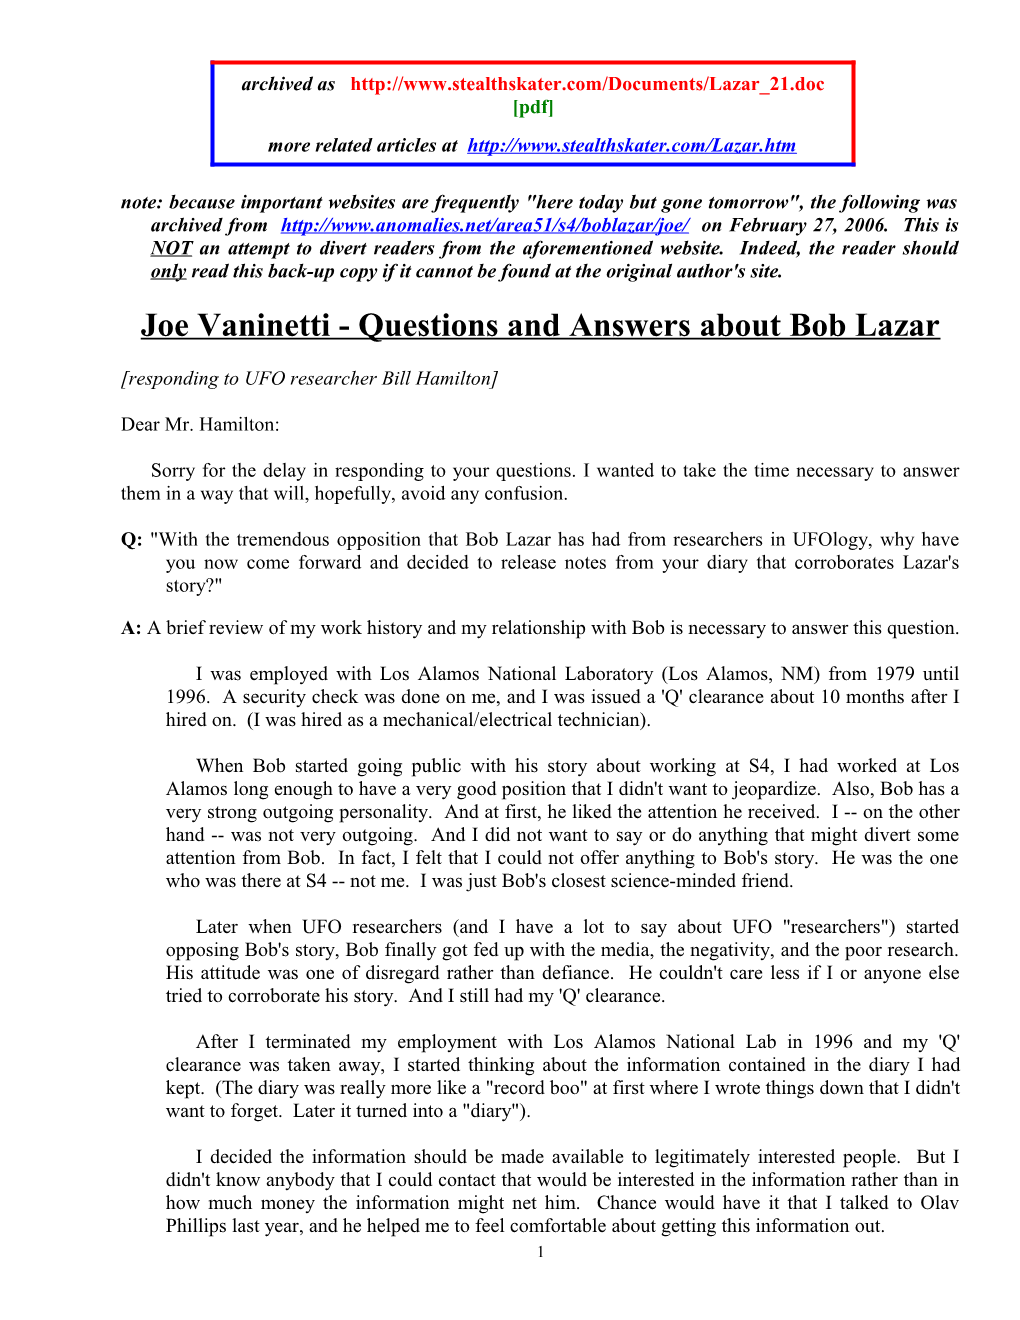 Joe Vaninetti - Questions and Answers About Bob Lazar